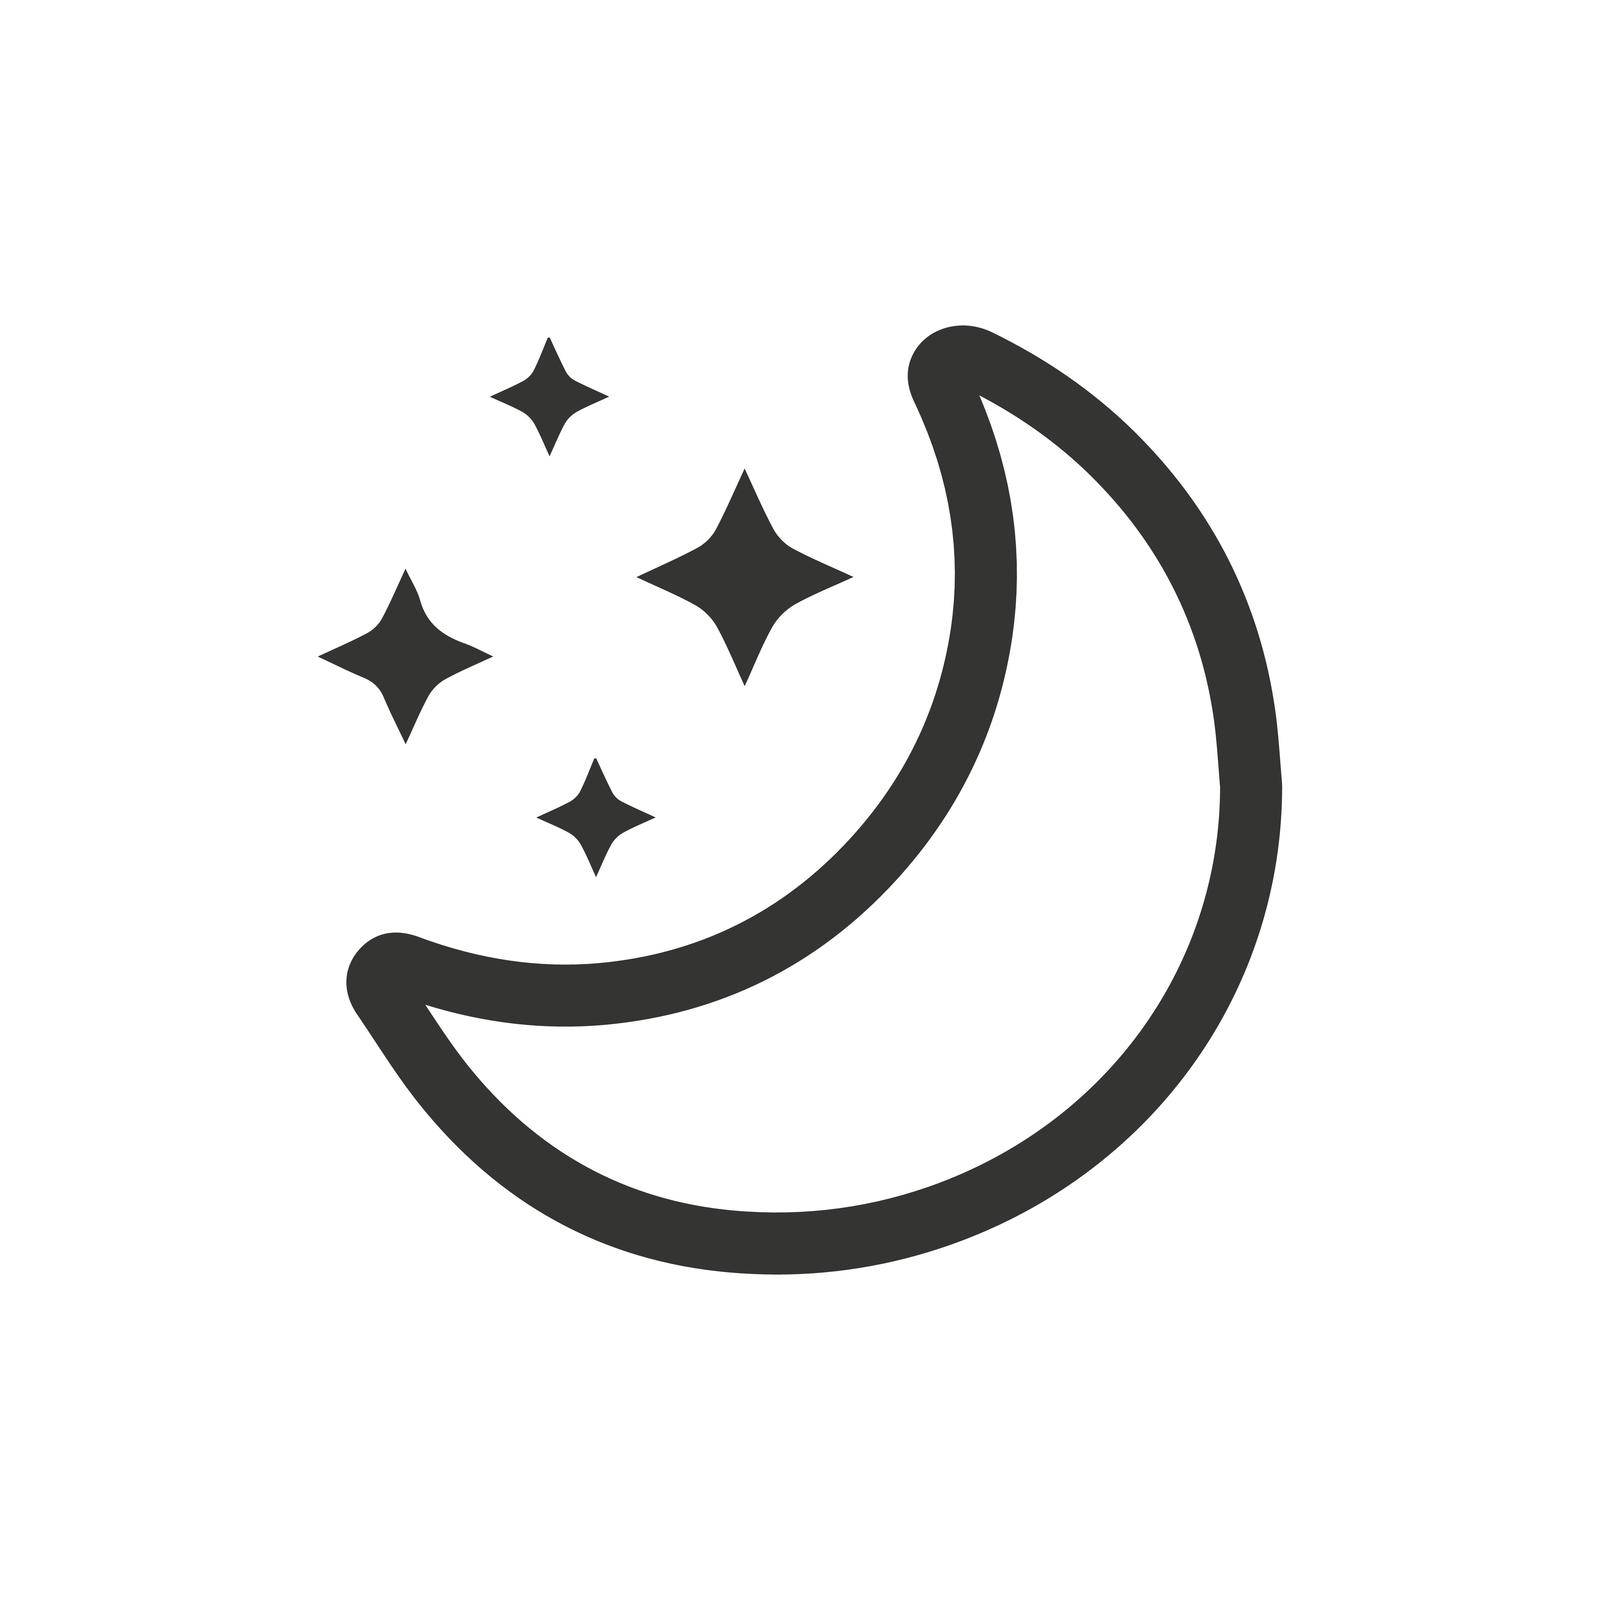 Moonlight icon. Vector EPS file.